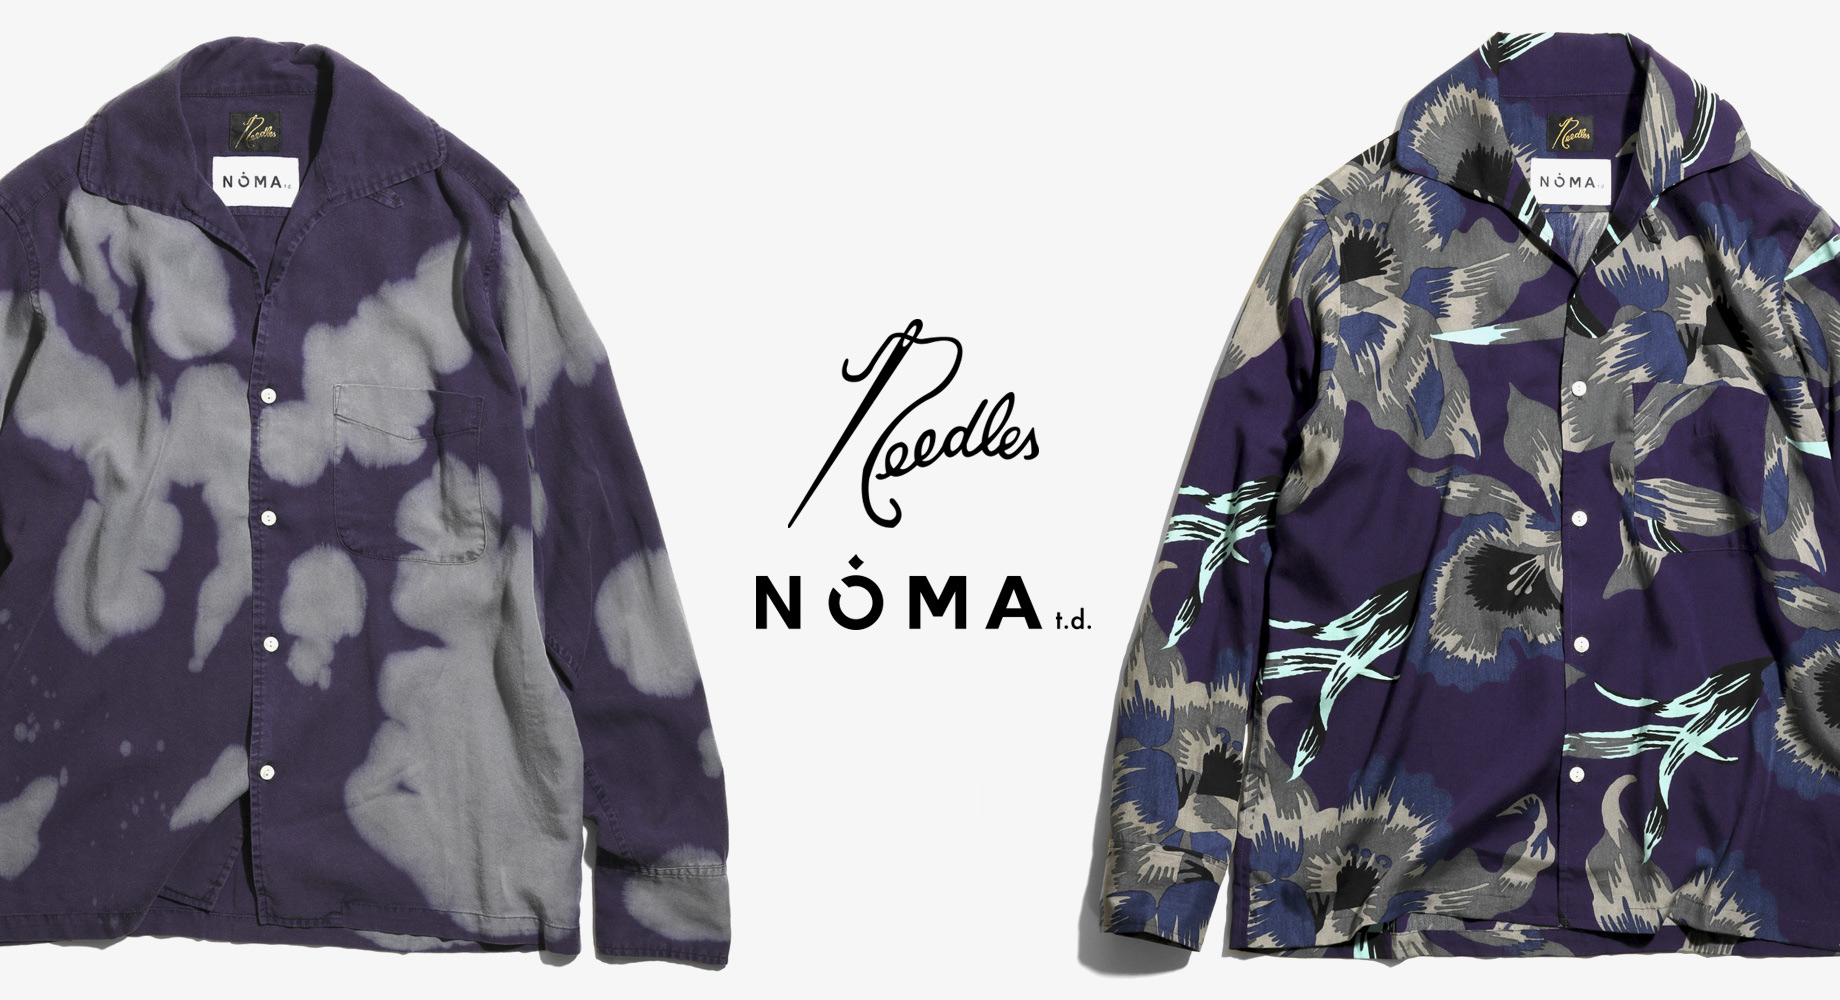 〈NEEDLES〉x〈NOMA t.d.〉- COLLABORATION PRODUCTS 2020 Spring